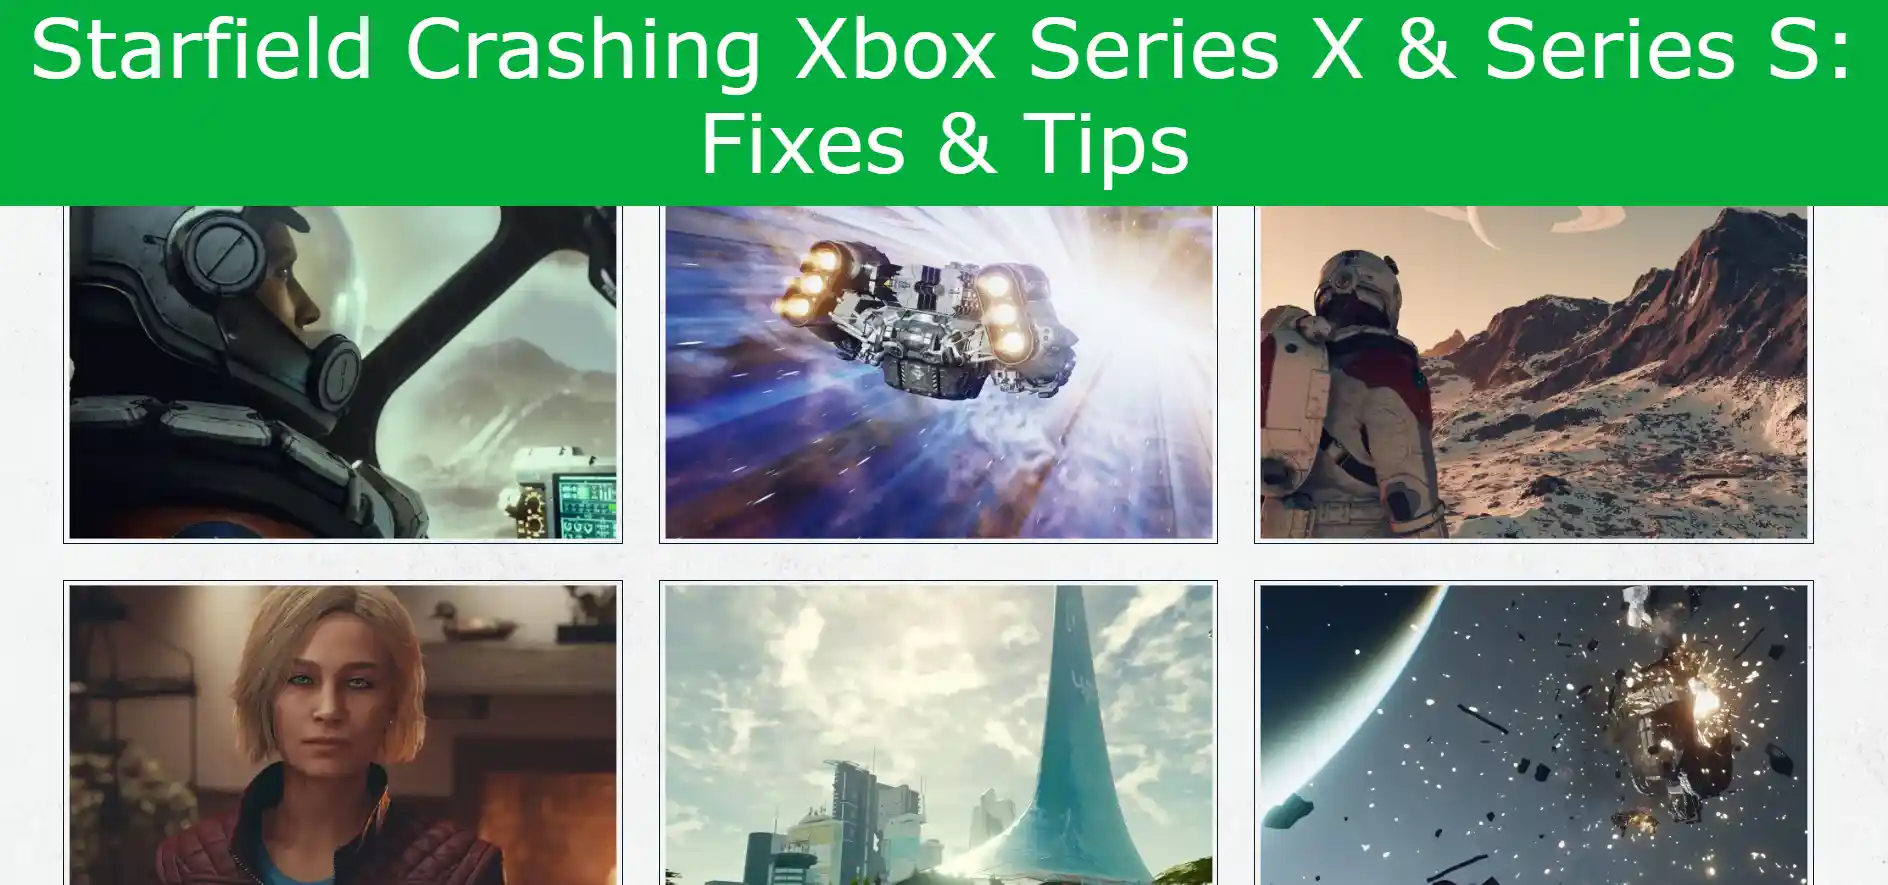 You are currently viewing Starfield Crashing Xbox Series X & Series S: Fixes & Tips